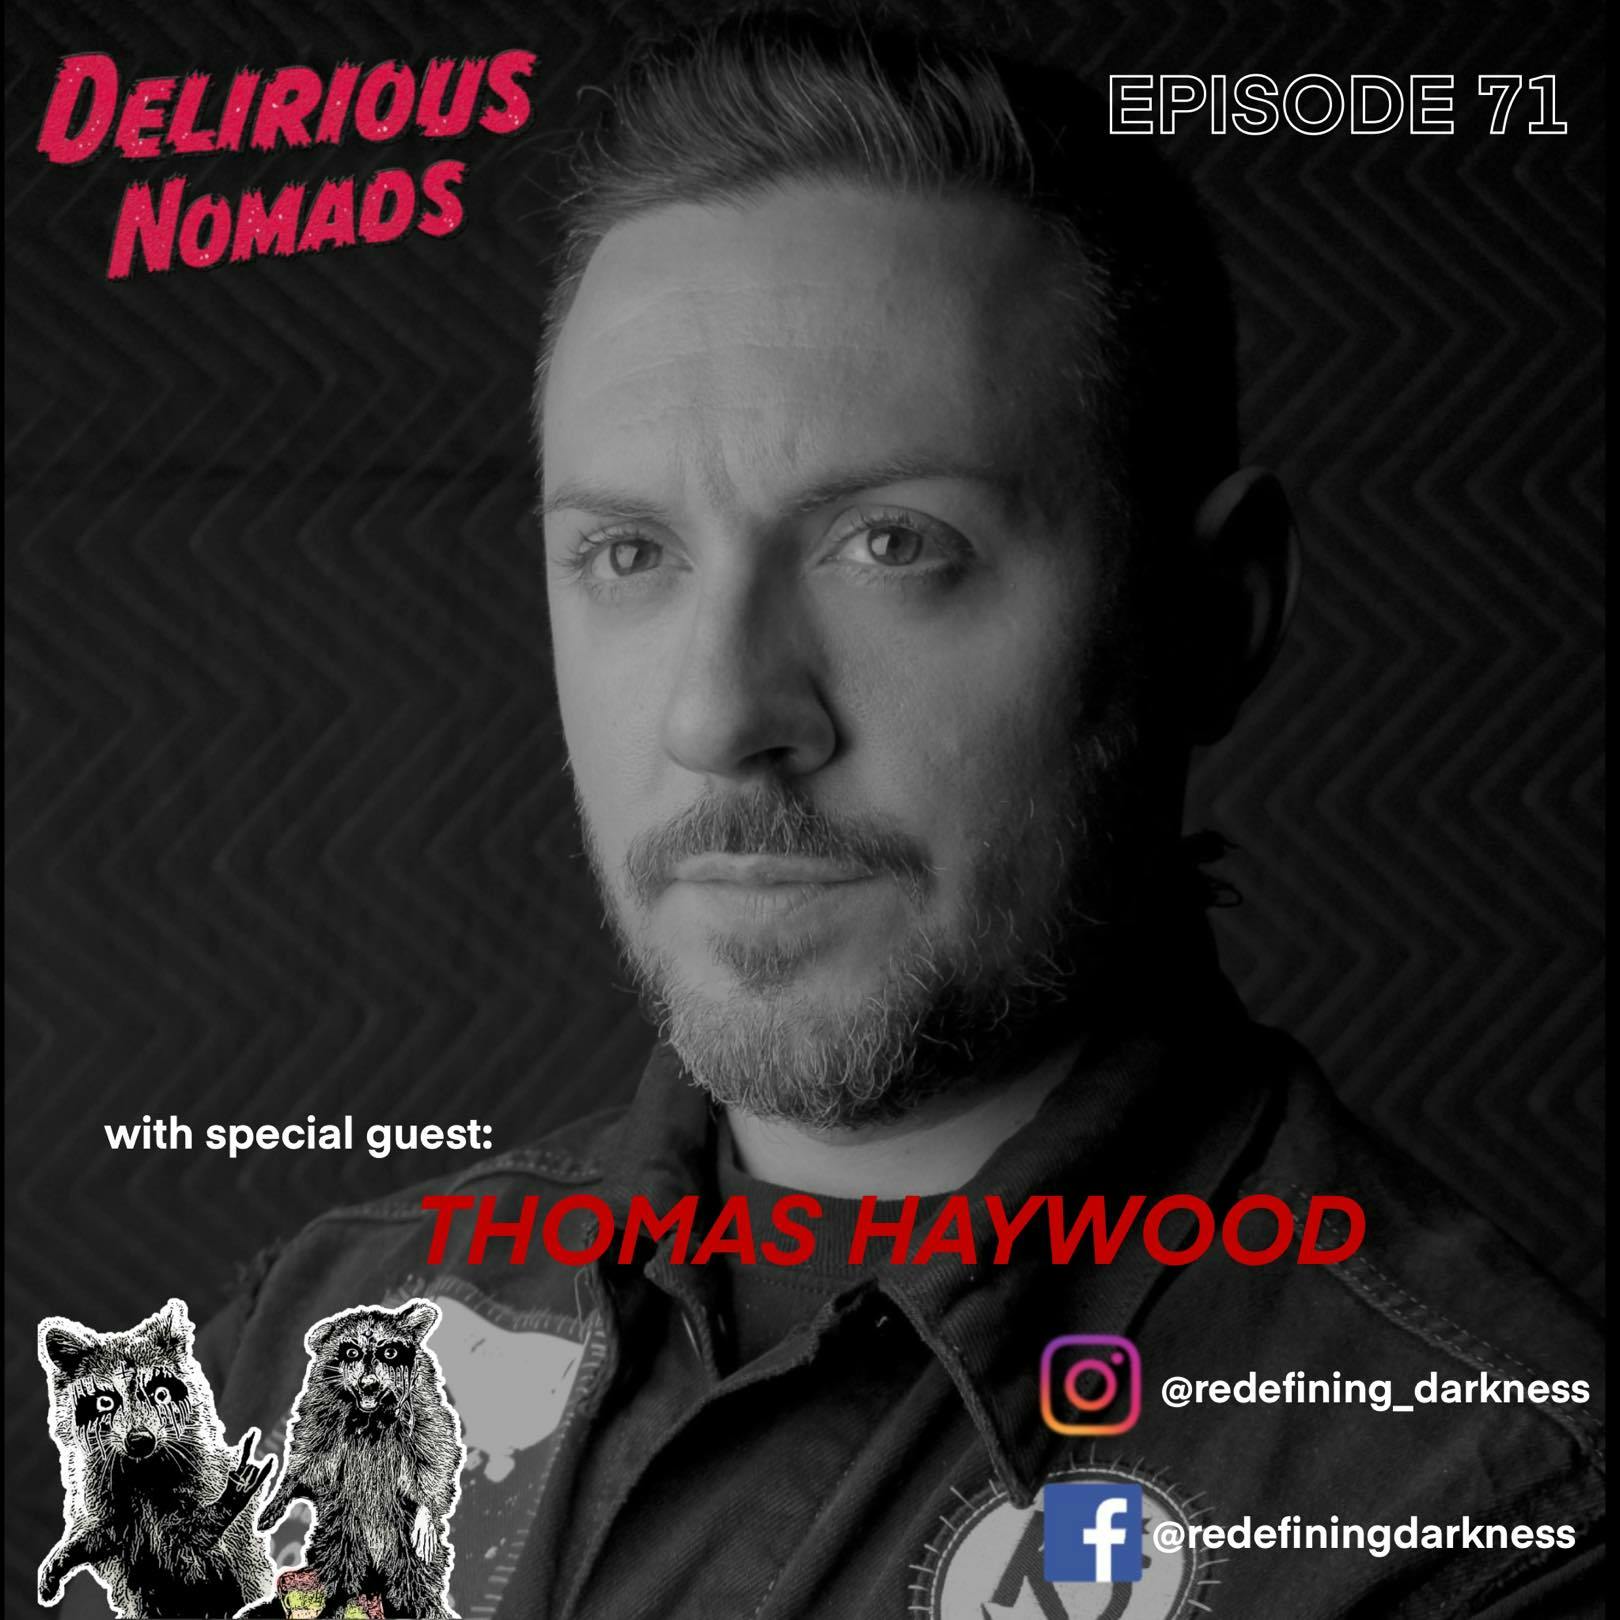 Delirious Nomads: Thomas Haywood Of Redefining Darkness On Death Metal Today! Image